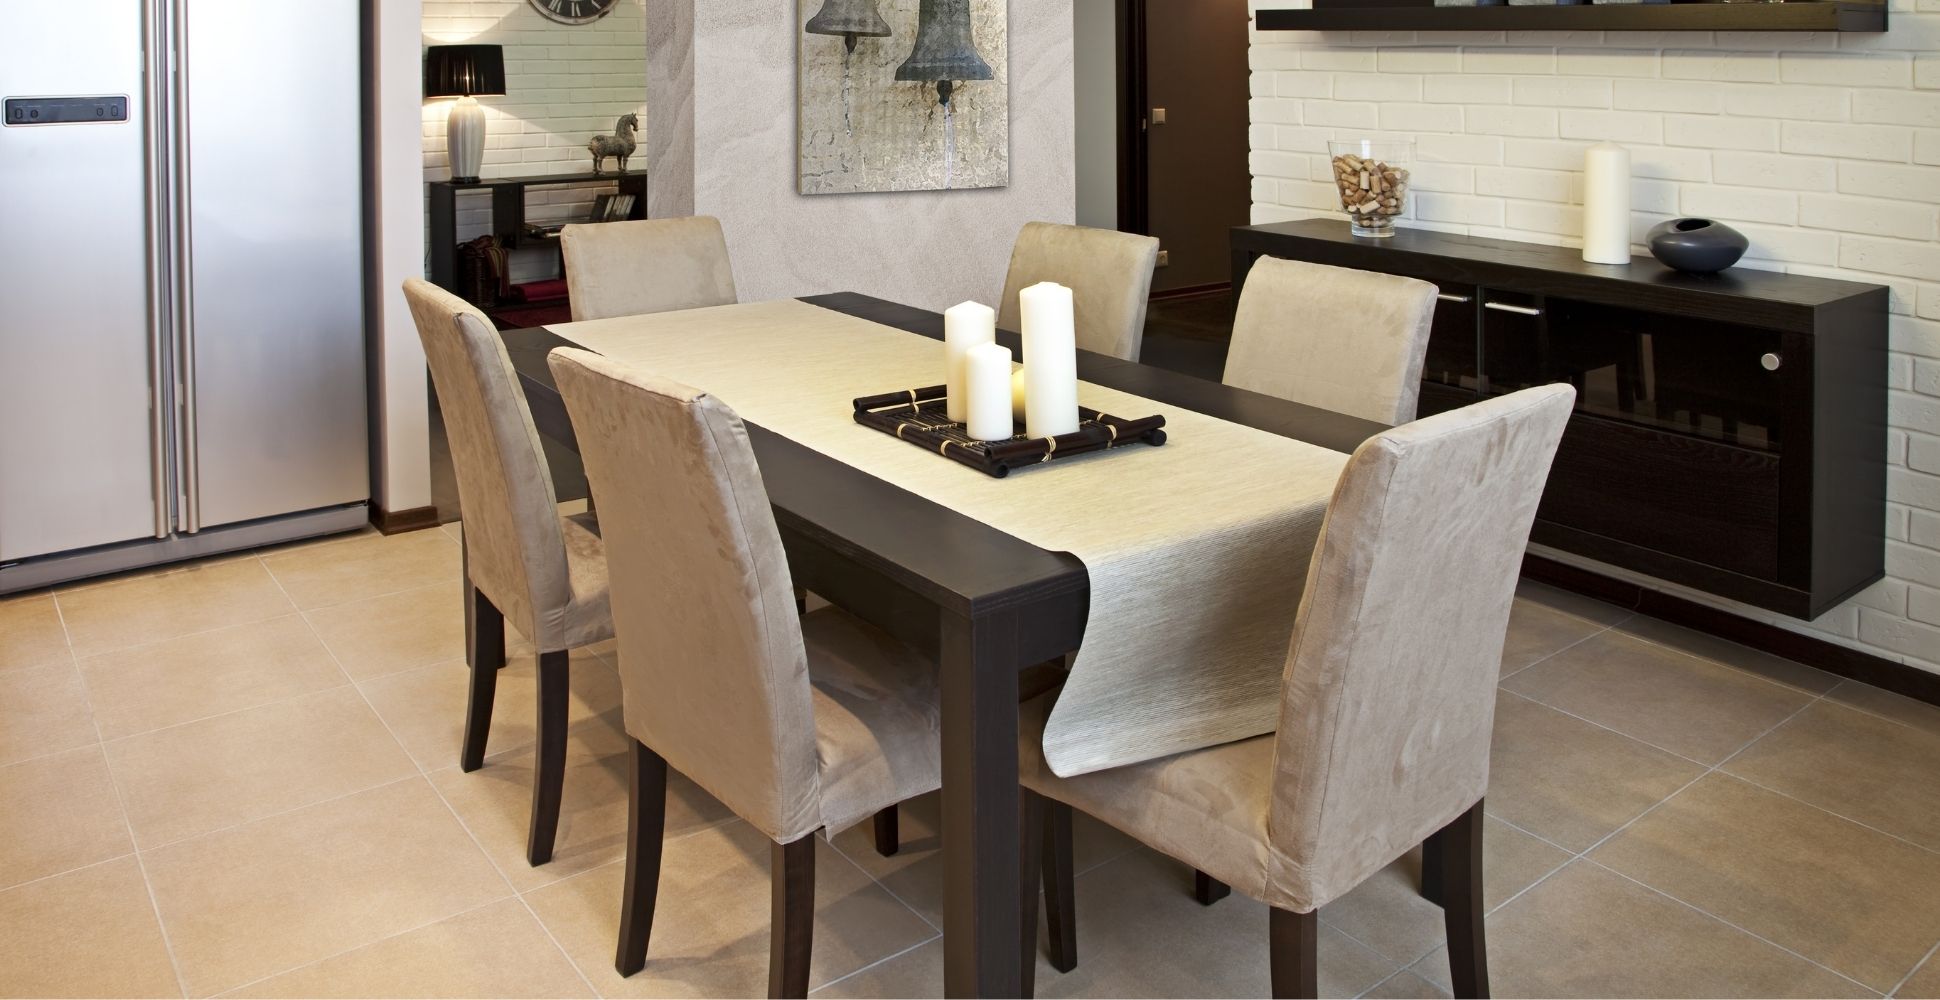 6 Best Dining Chair Covers UK (2022 Review) | Spruce Up!